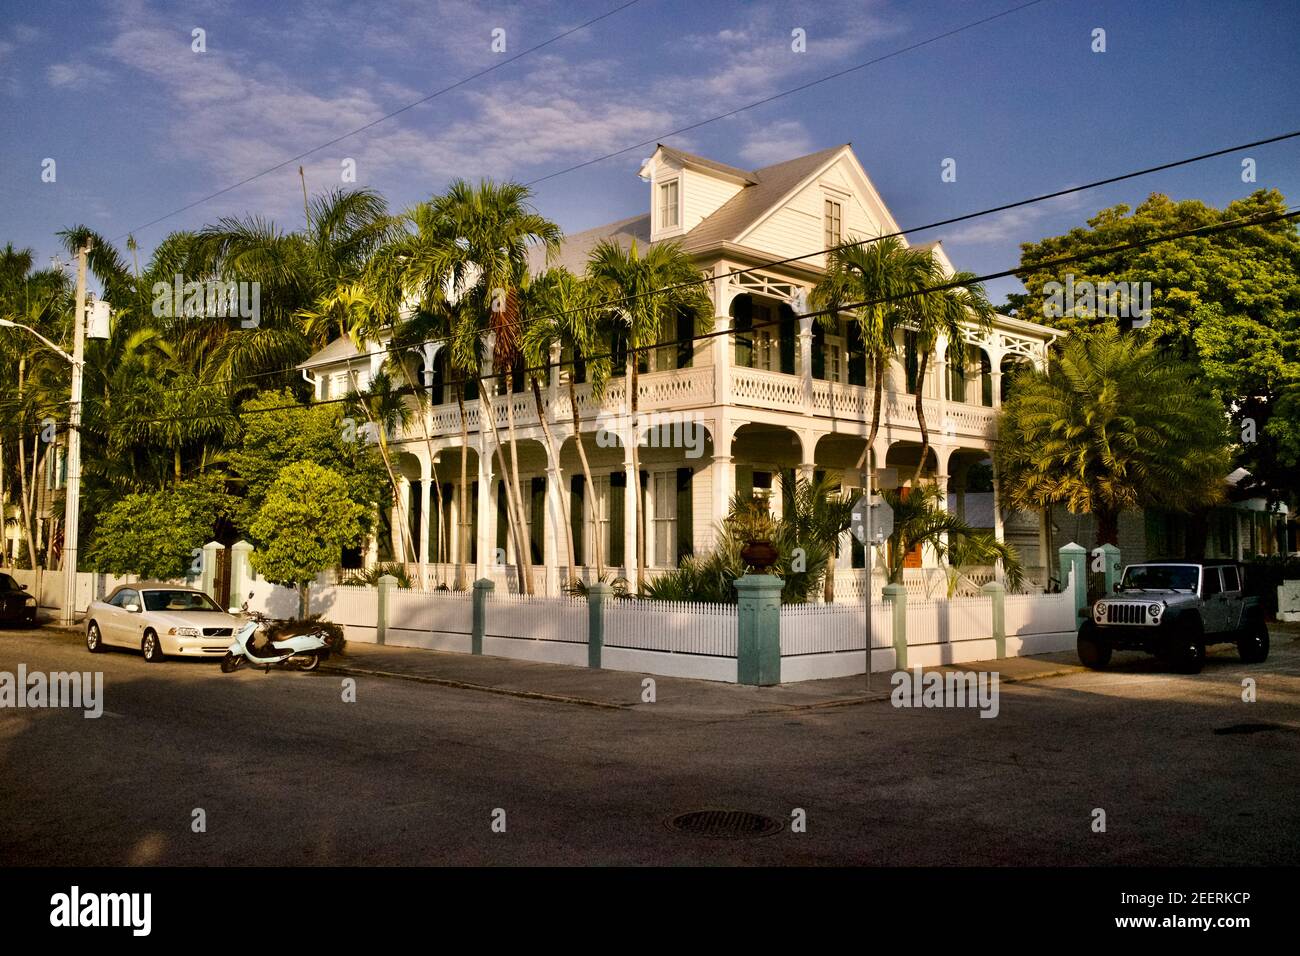 Large Victorian home in Key West, Florida, FL USA.  Southern most point in the continental USA.  Island vacation destination. Stock Photo